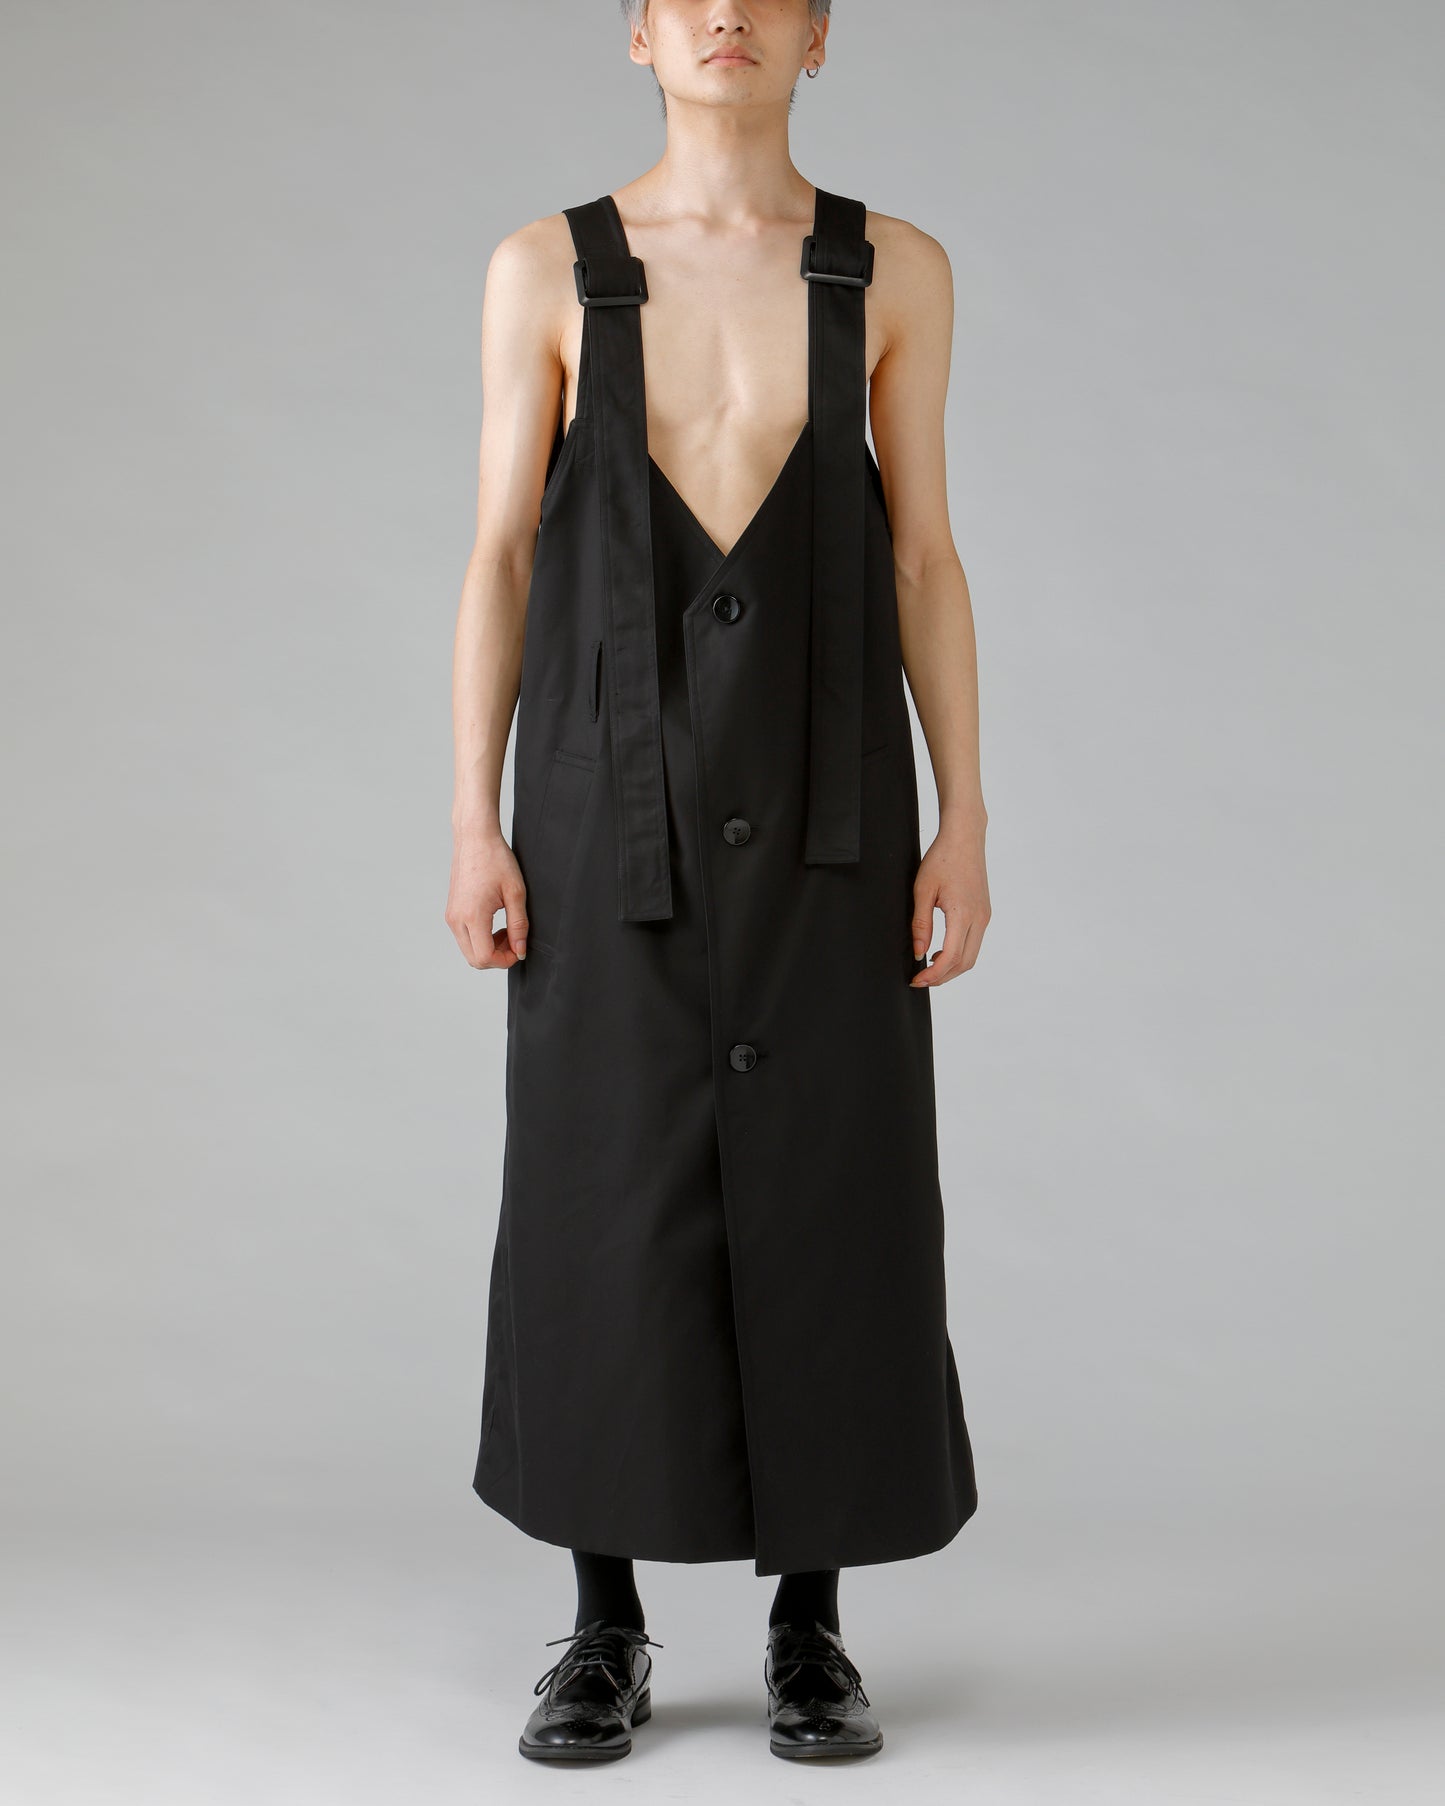 disemBySiiK Belted Trench Coat